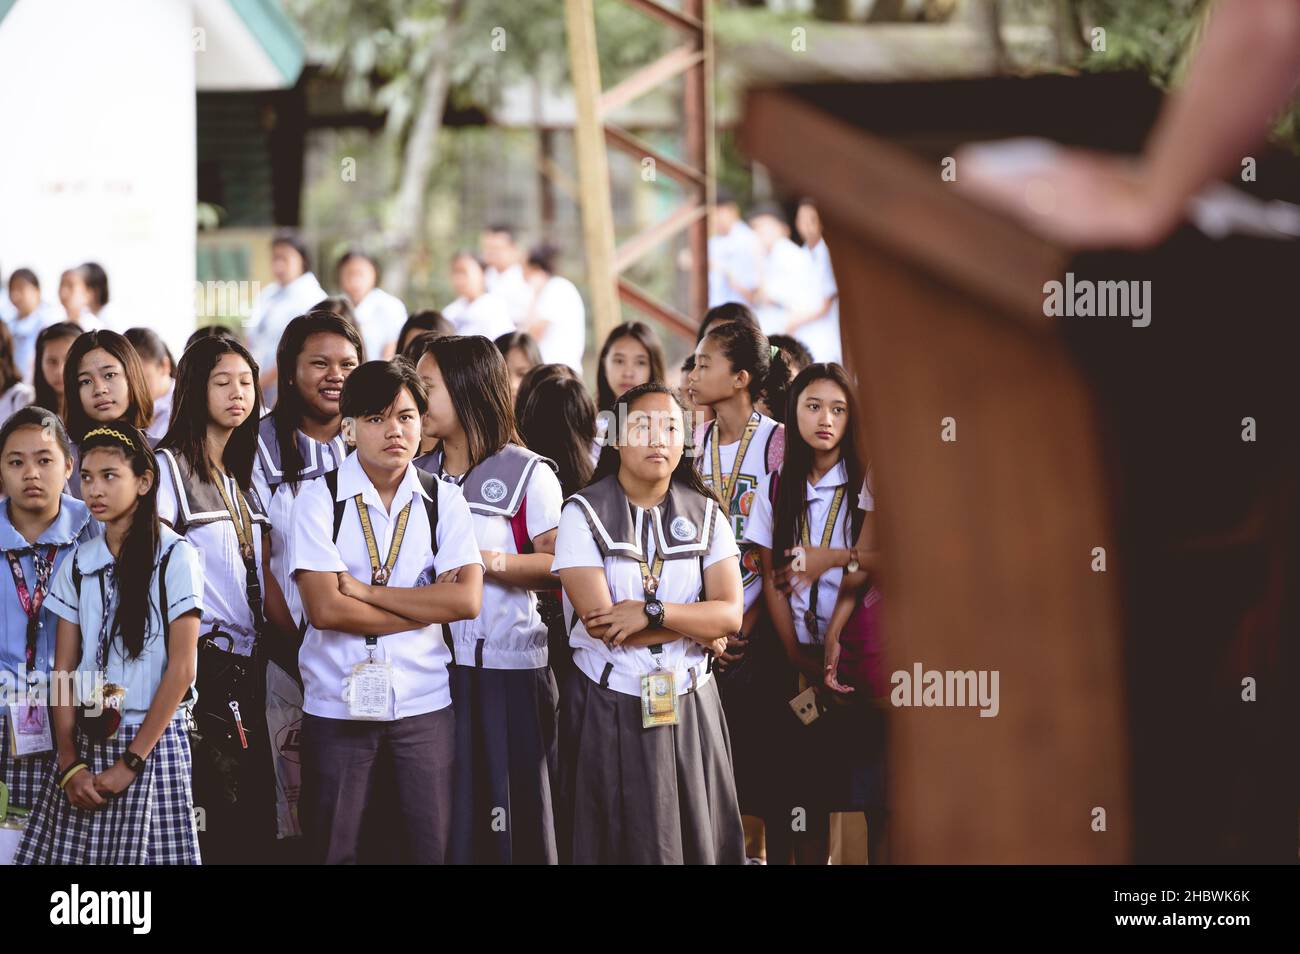 SCHOOL CHILDREN IN A FILIPINO SCHOOL WAITING FOR CLASS, PHILIPPINES - Jan 01, 2019: A group of Filipino students waiting for class to start Stock Photo